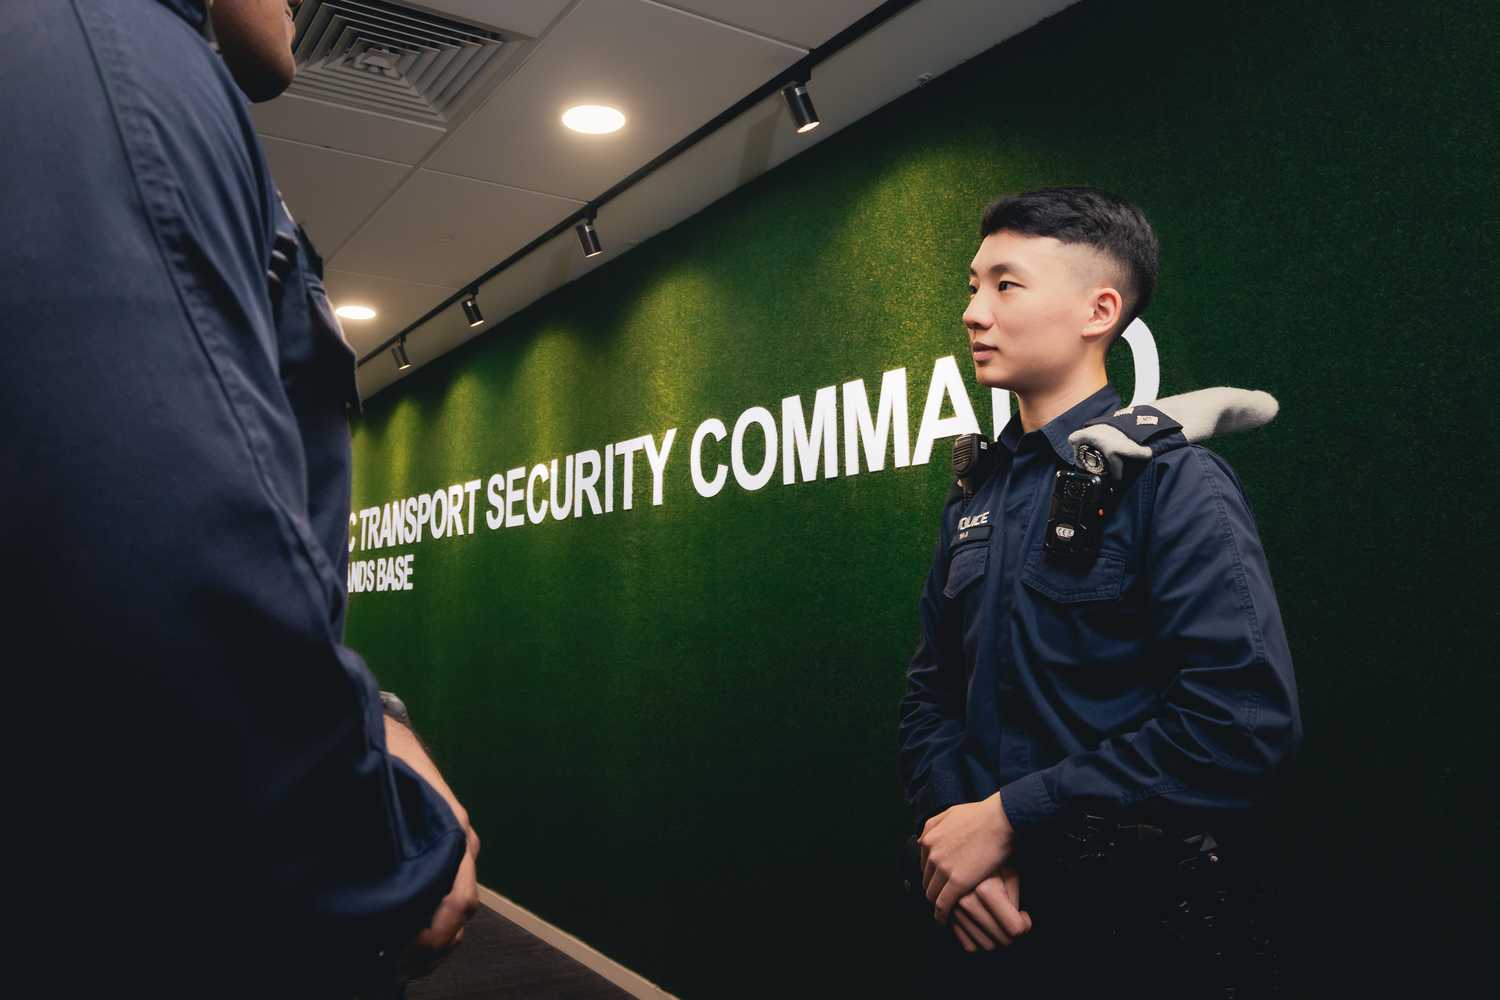 officer giving a briefing to a squad to the left, with a green background and white words stating "public transport security command"